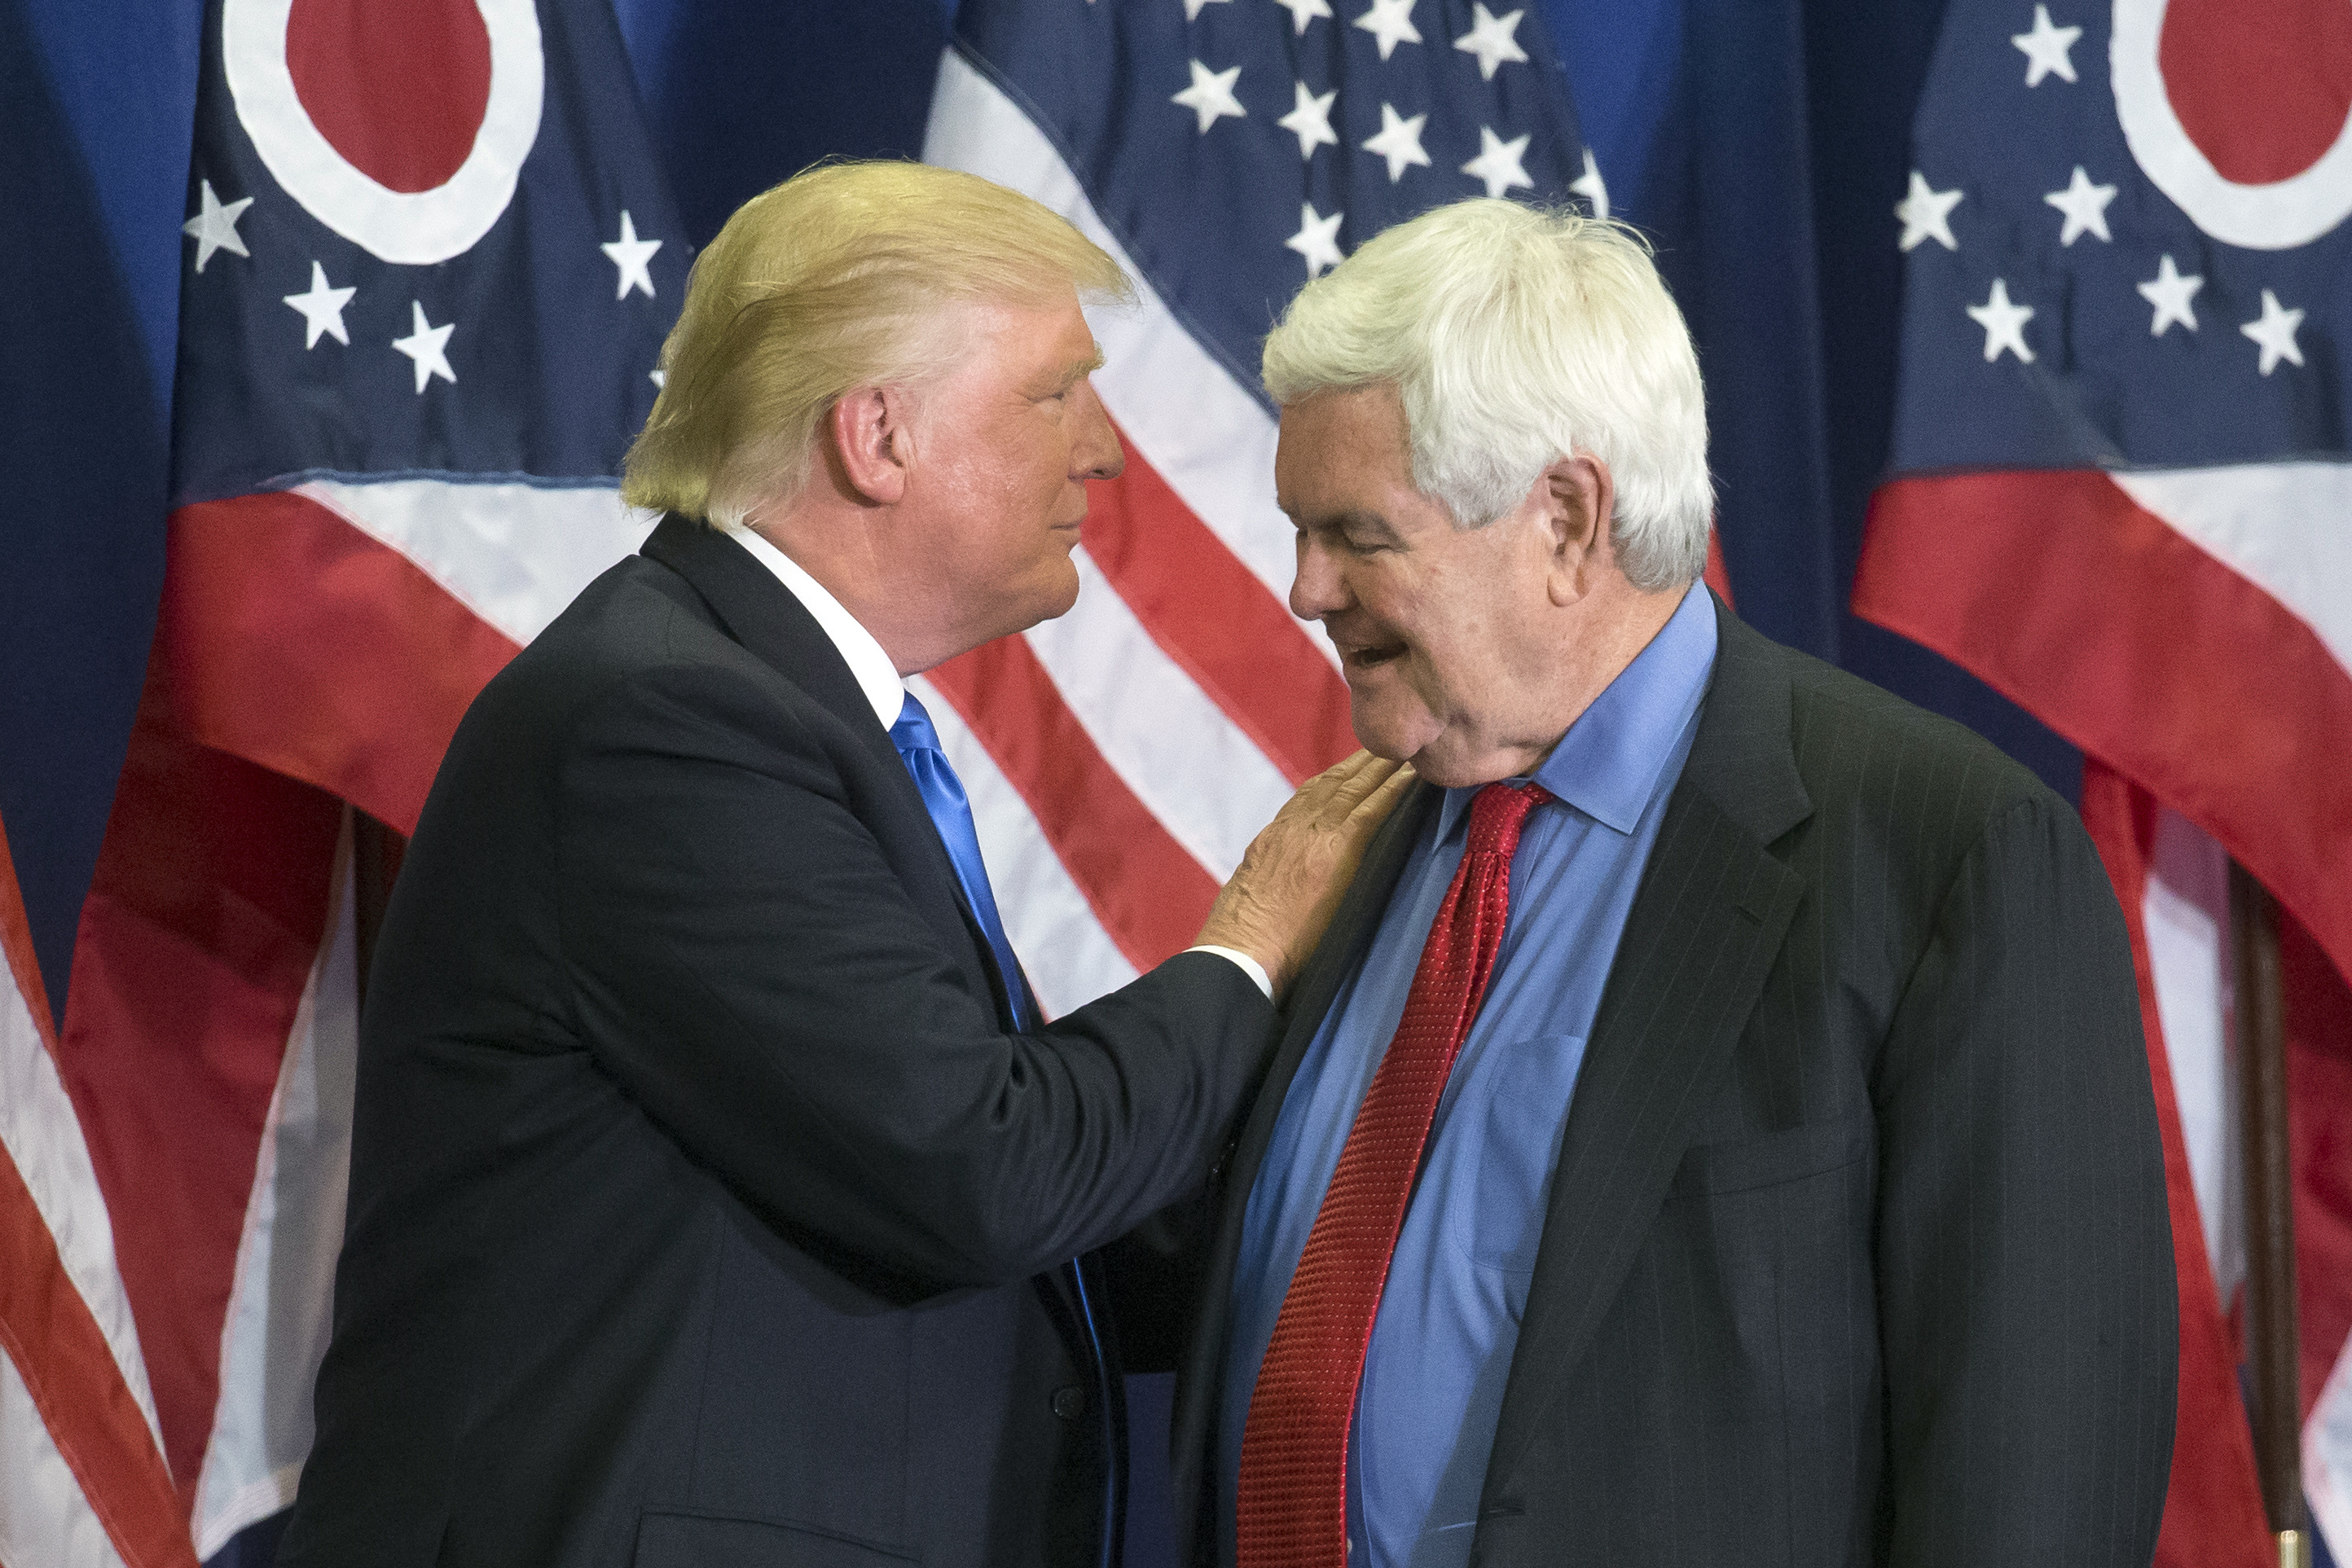 Newt Gingrich with Donald Trump